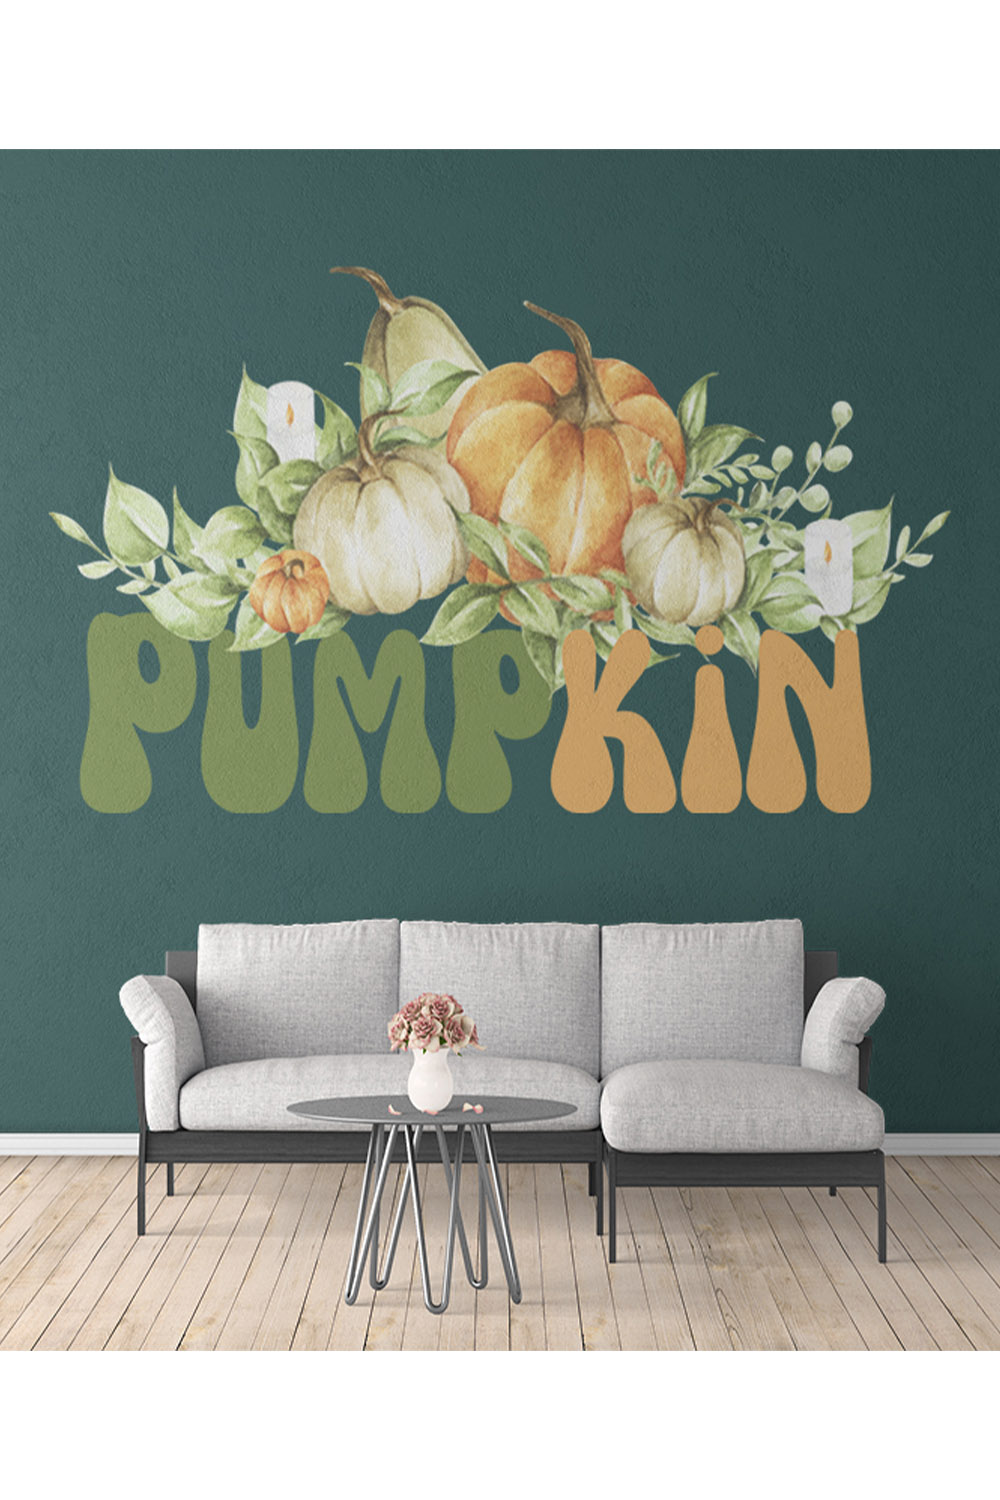 Charming picture of a pumpkin on the wall